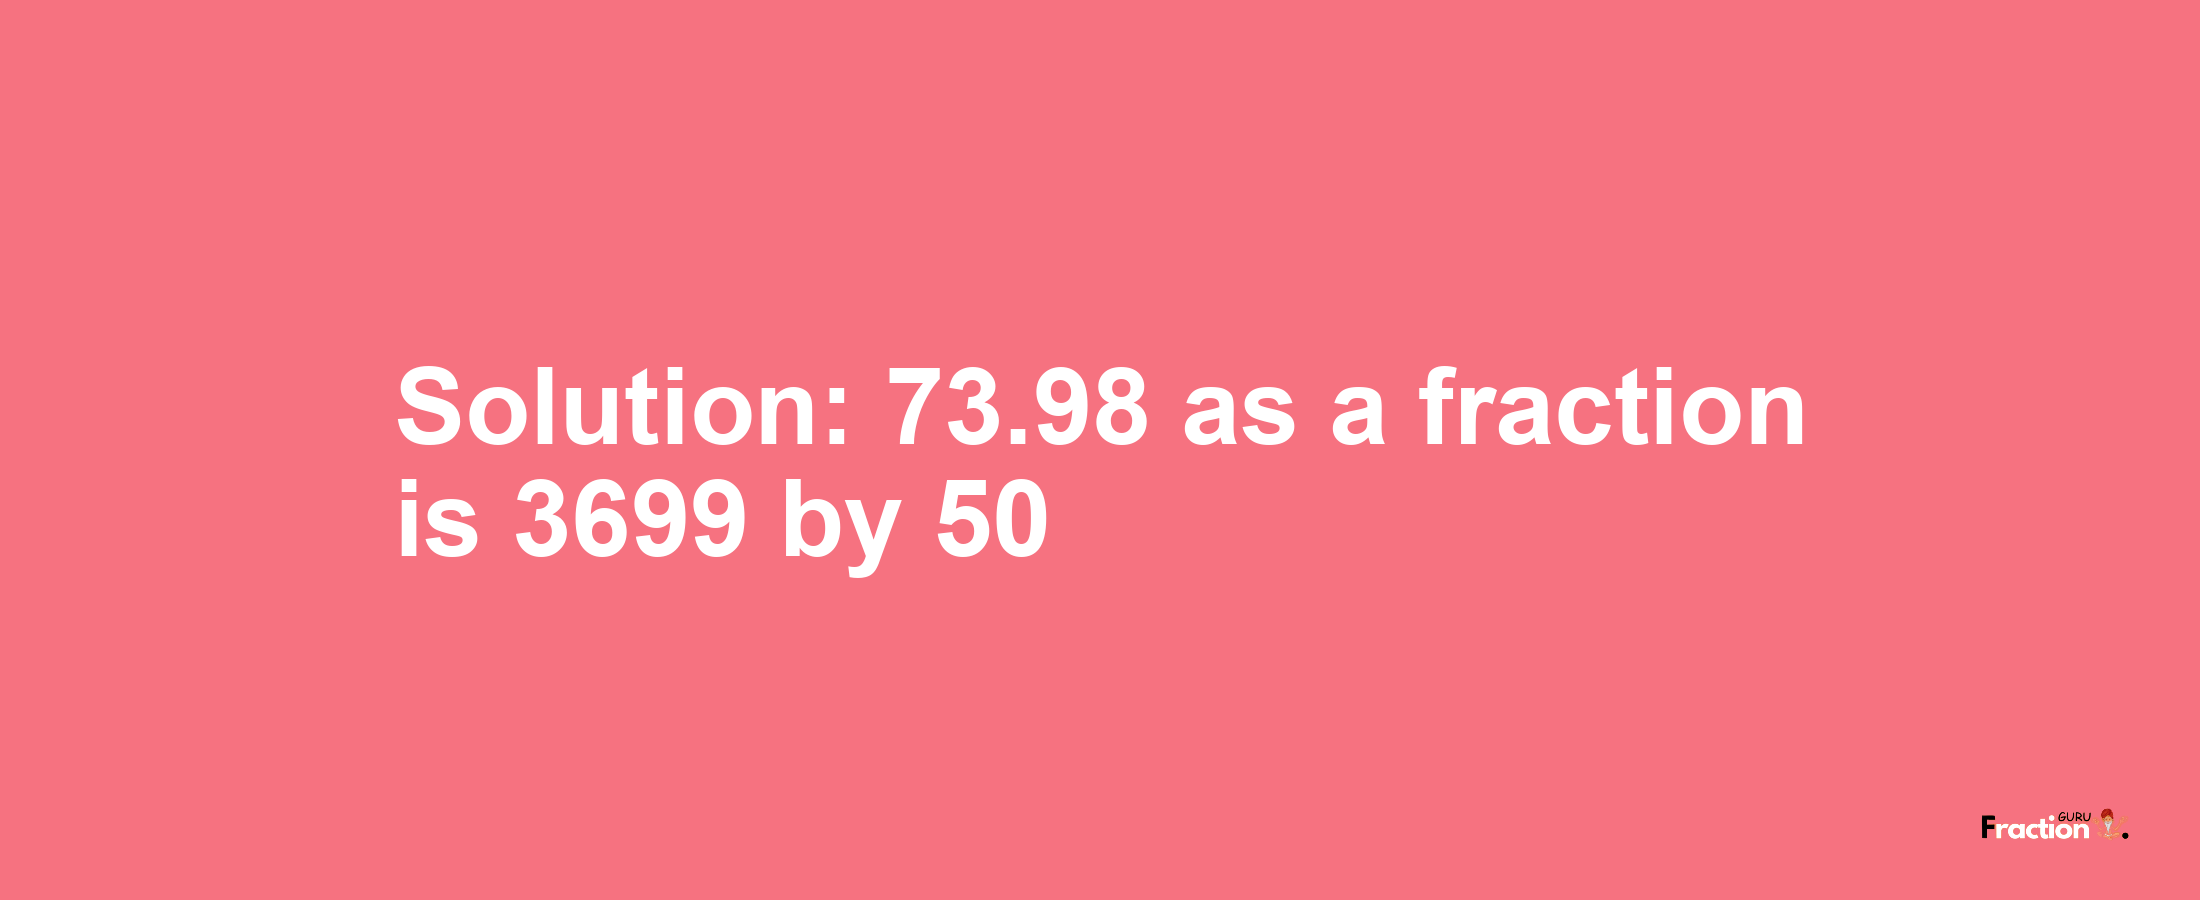 Solution:73.98 as a fraction is 3699/50